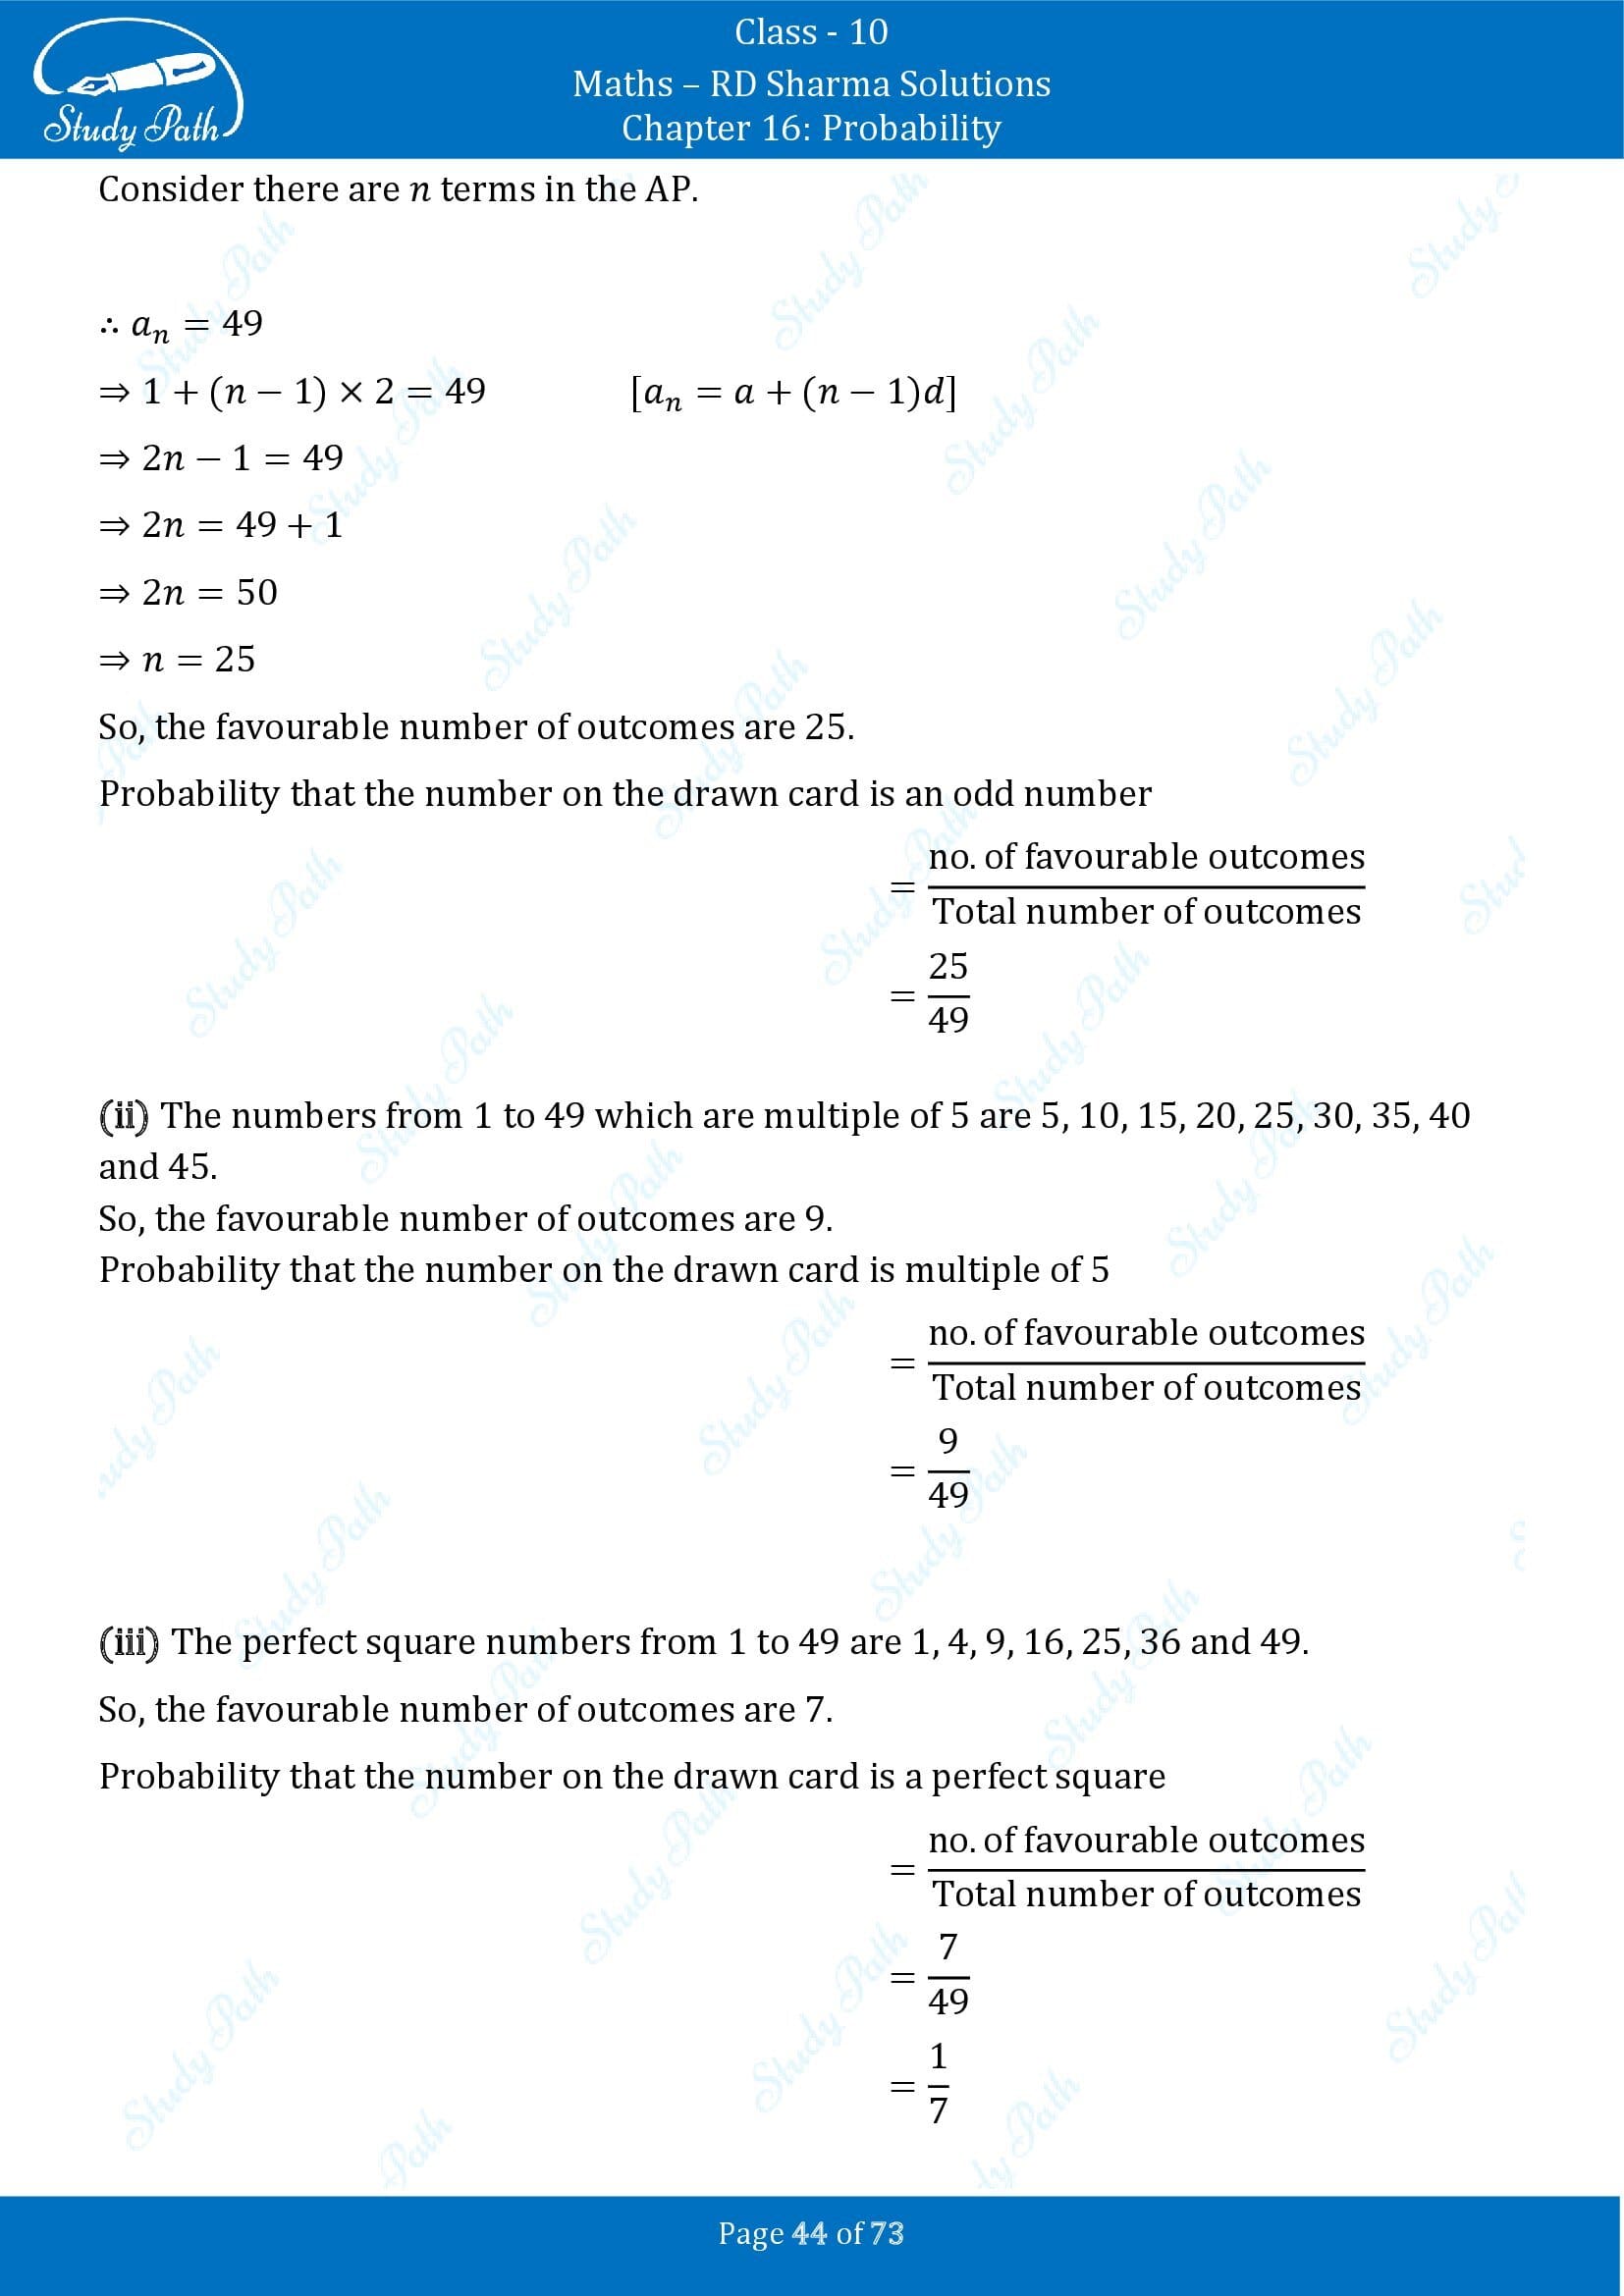 RD Sharma Solutions Class 10 Chapter 16 Probability Exercise 16.1 00044